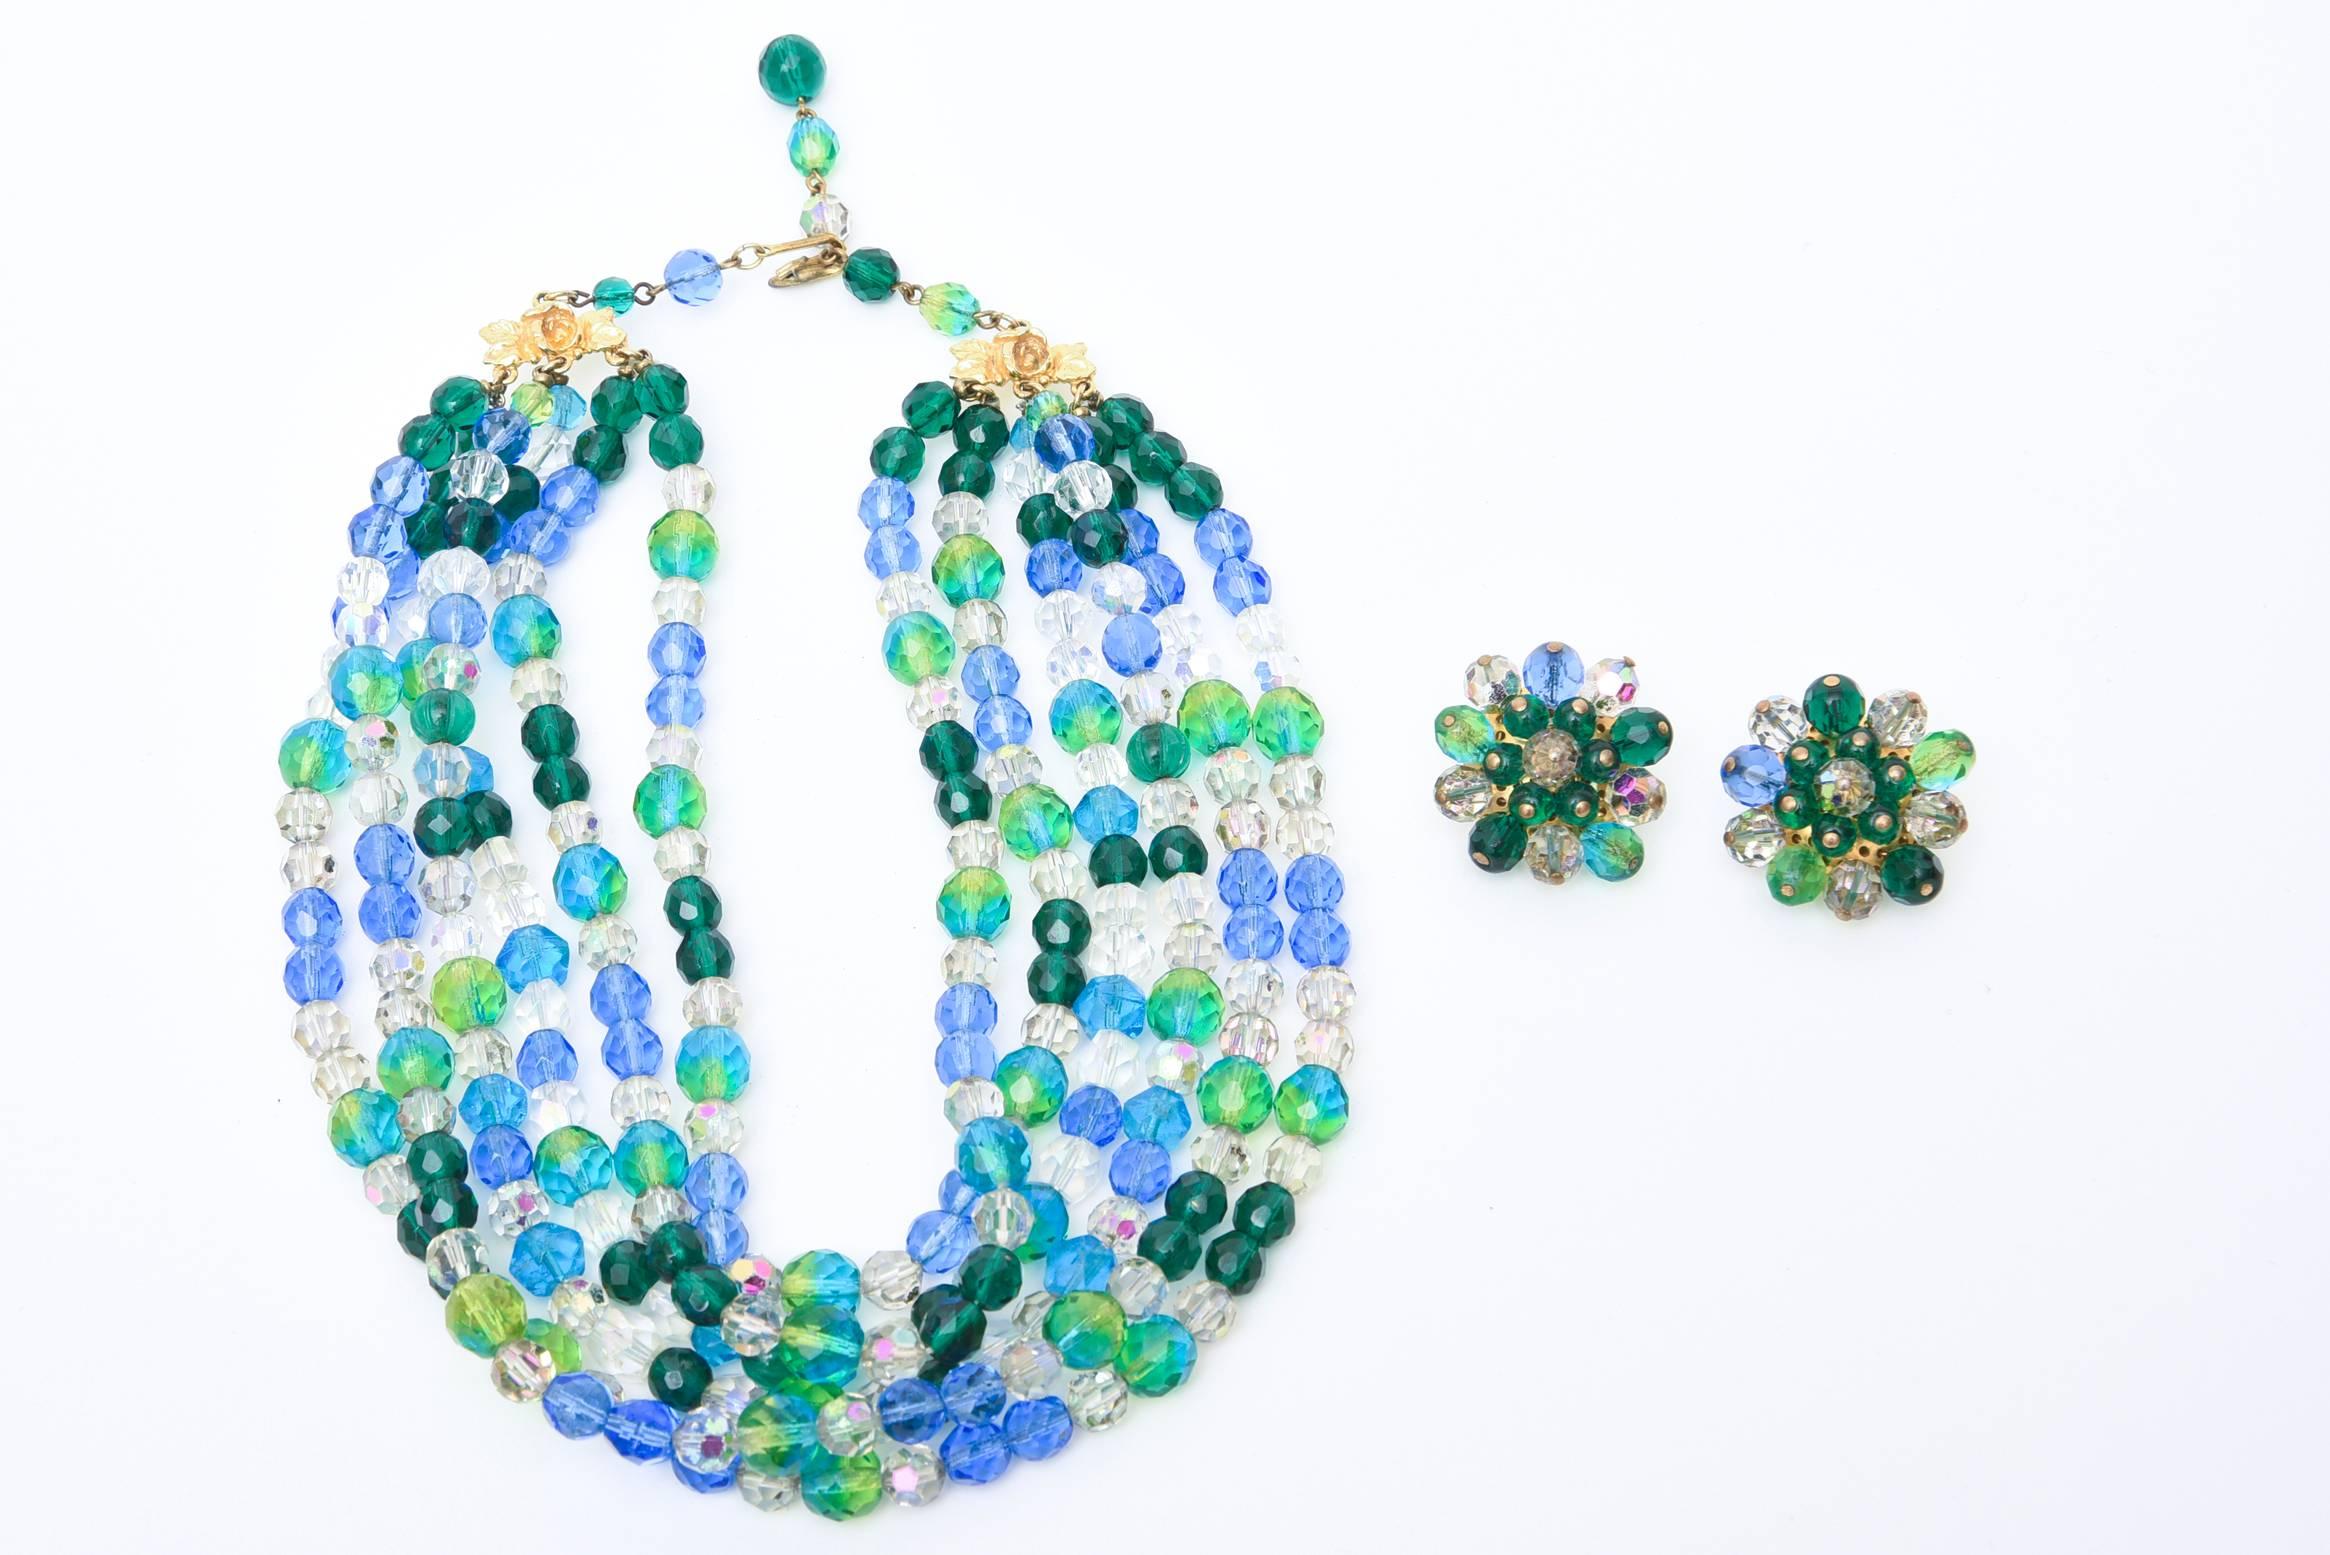 The colors of the sea in alternating glass beads of blues and greens make up this signed vintage Elsa Schiaparelli stunning necklace. There are 6 wide strands on each side of luscious colored glass beads and matching clip on cluster earrings. Sold